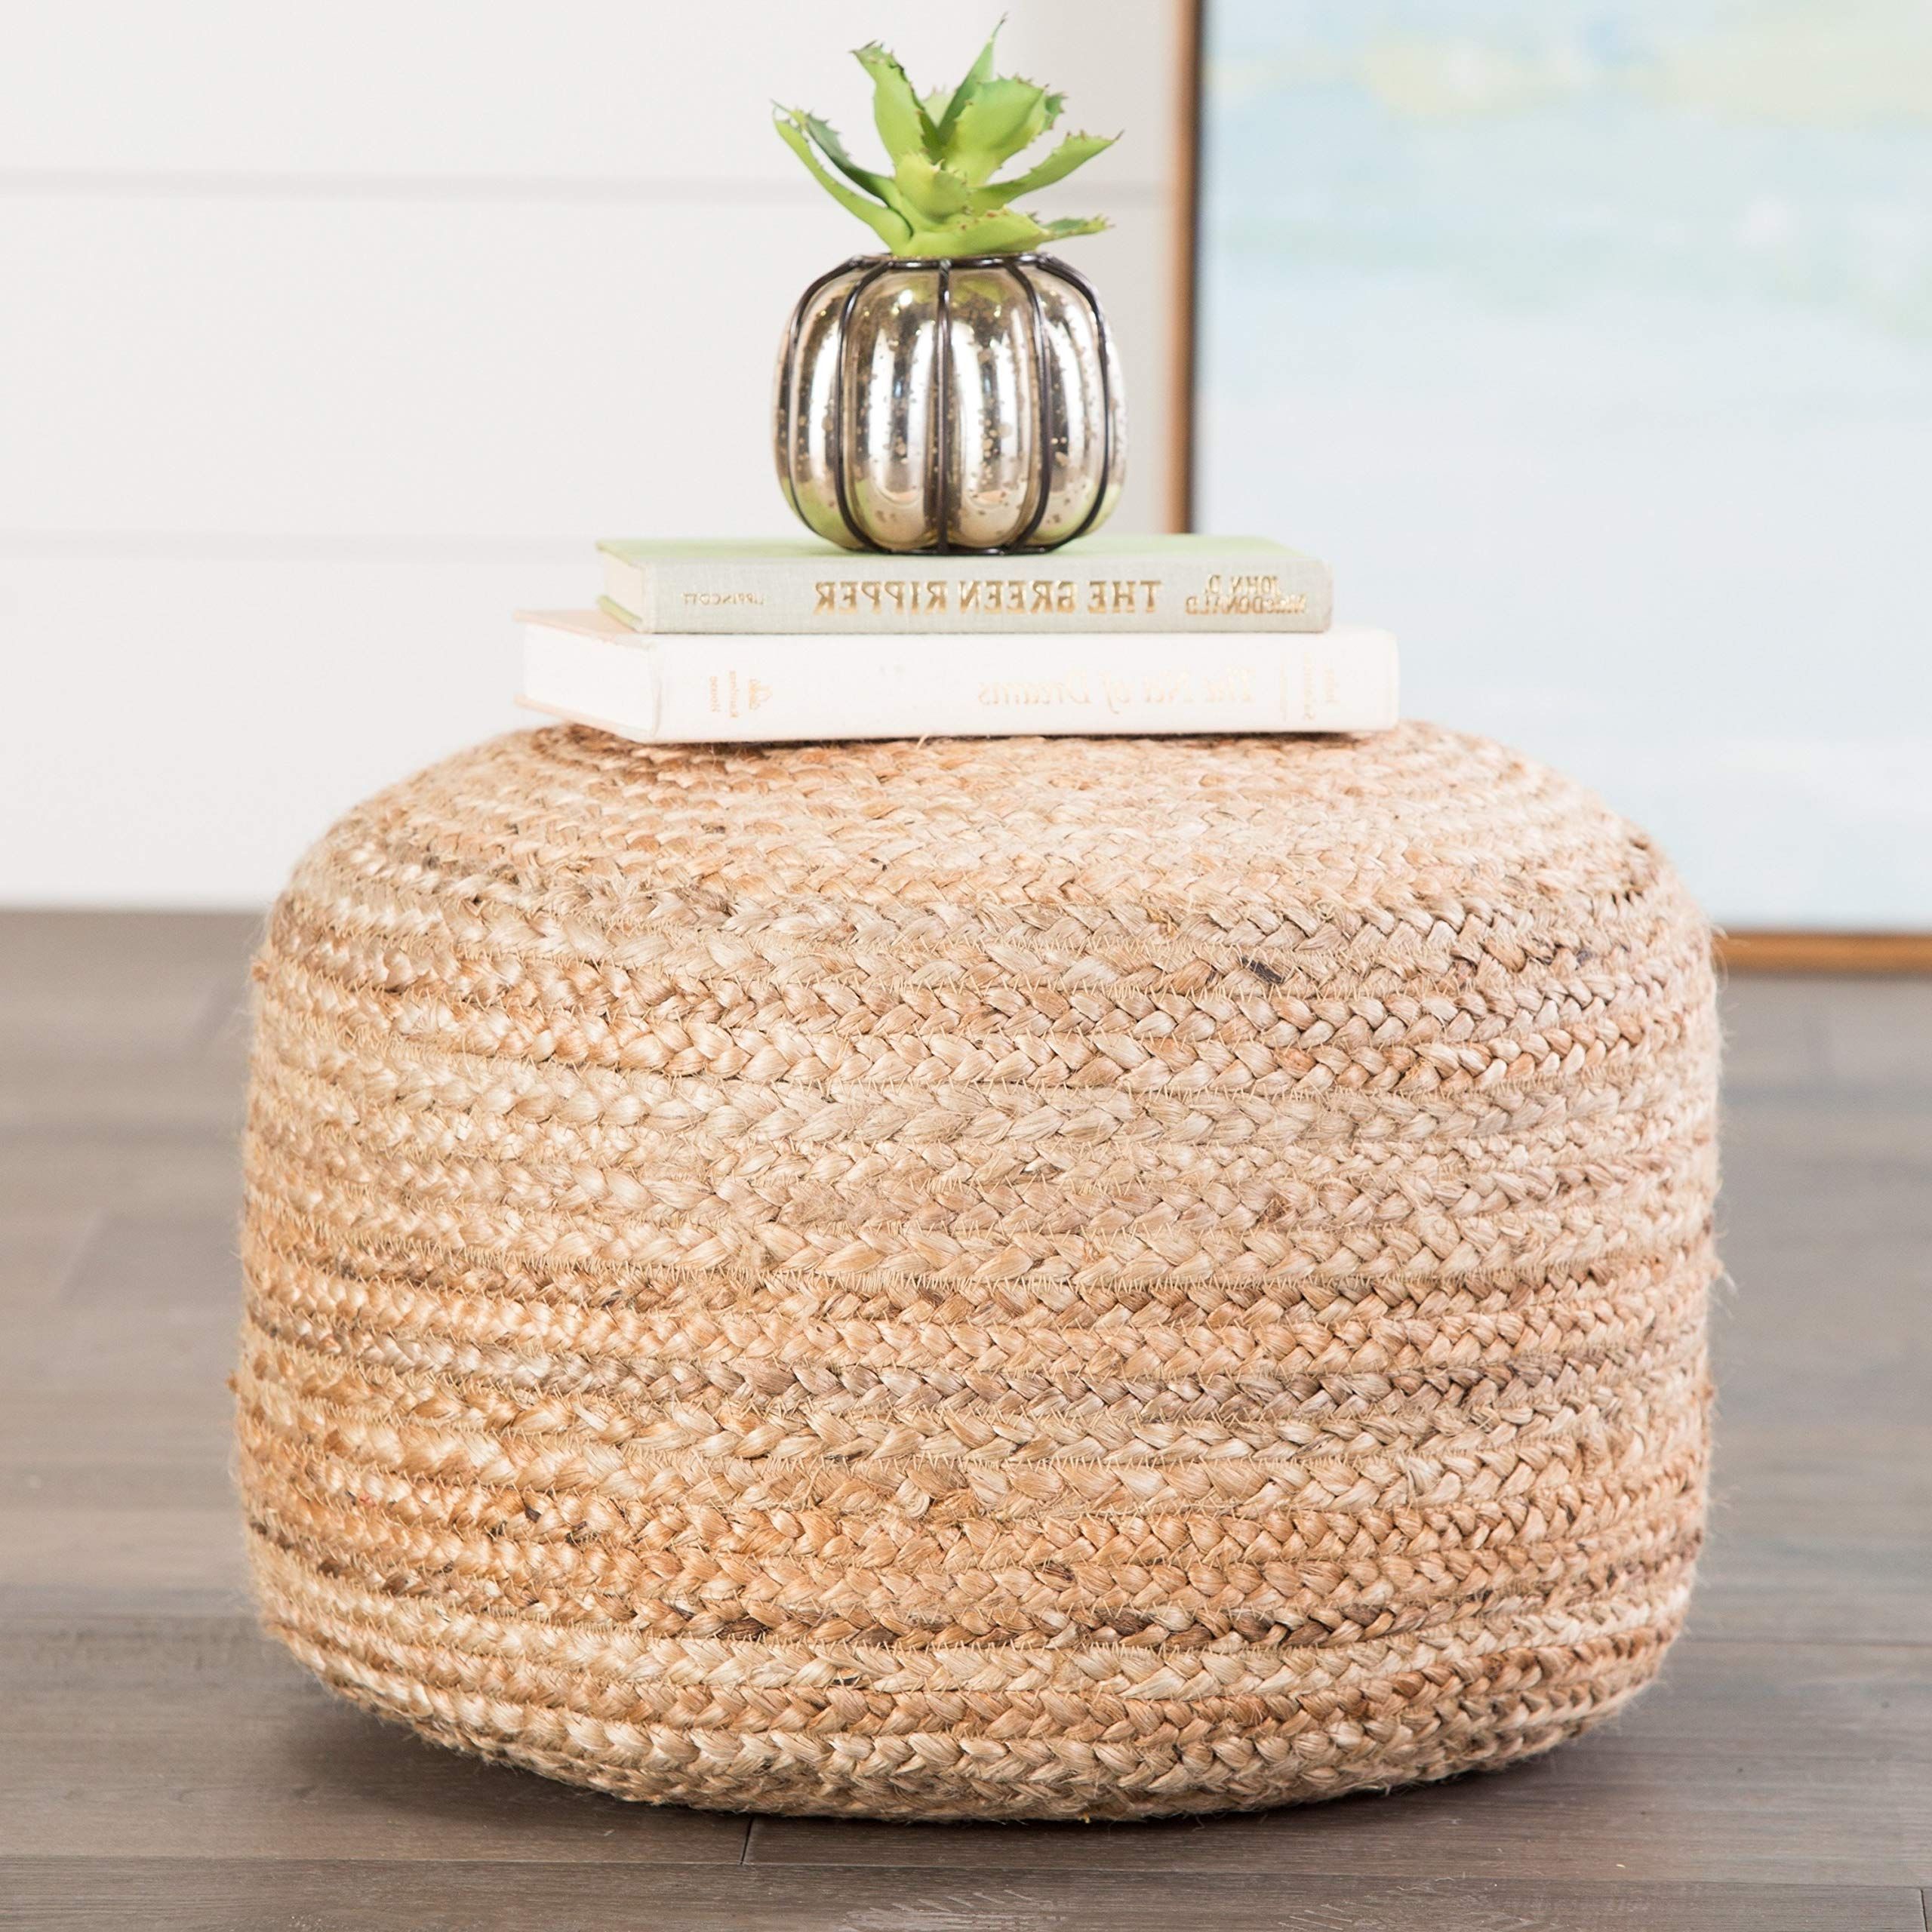 Natural Ottomans Intended For 2018 Amazon: Natural Jute Ottoman, Beige Braided Rows Round Pouf Beads Fill,  Modern Braid Weave Circle Footstool For Sitting Area Cottage Cabin Living  Room Durable Footrest Stool, 12" Tall Circular Shape : Home (View 3 of 10)